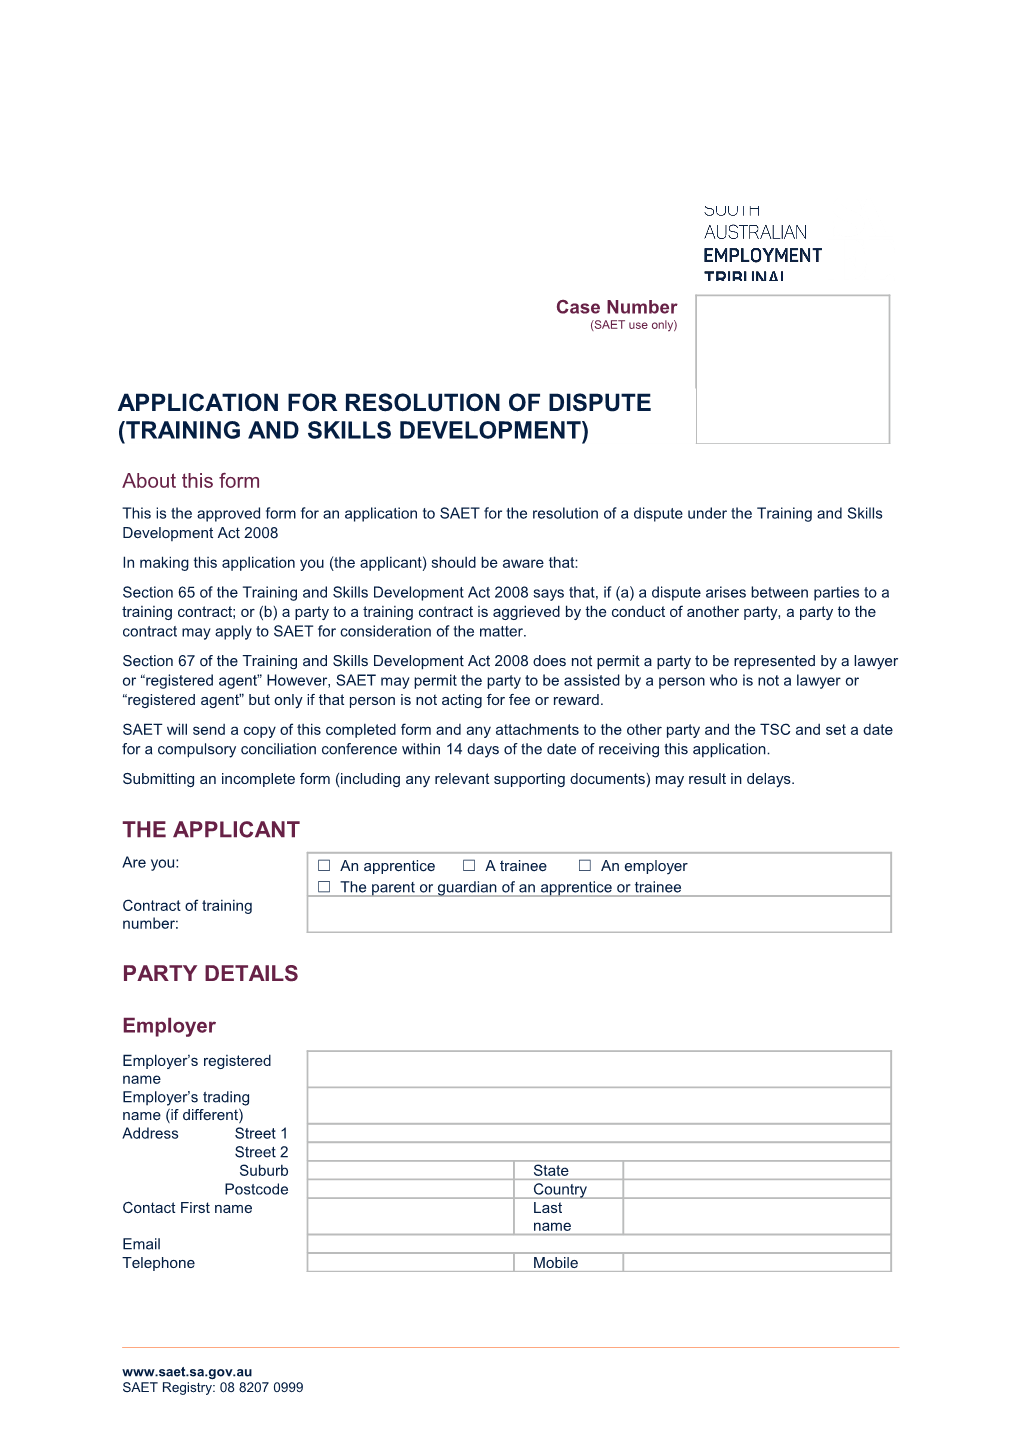 Application for Resolution of Dispute